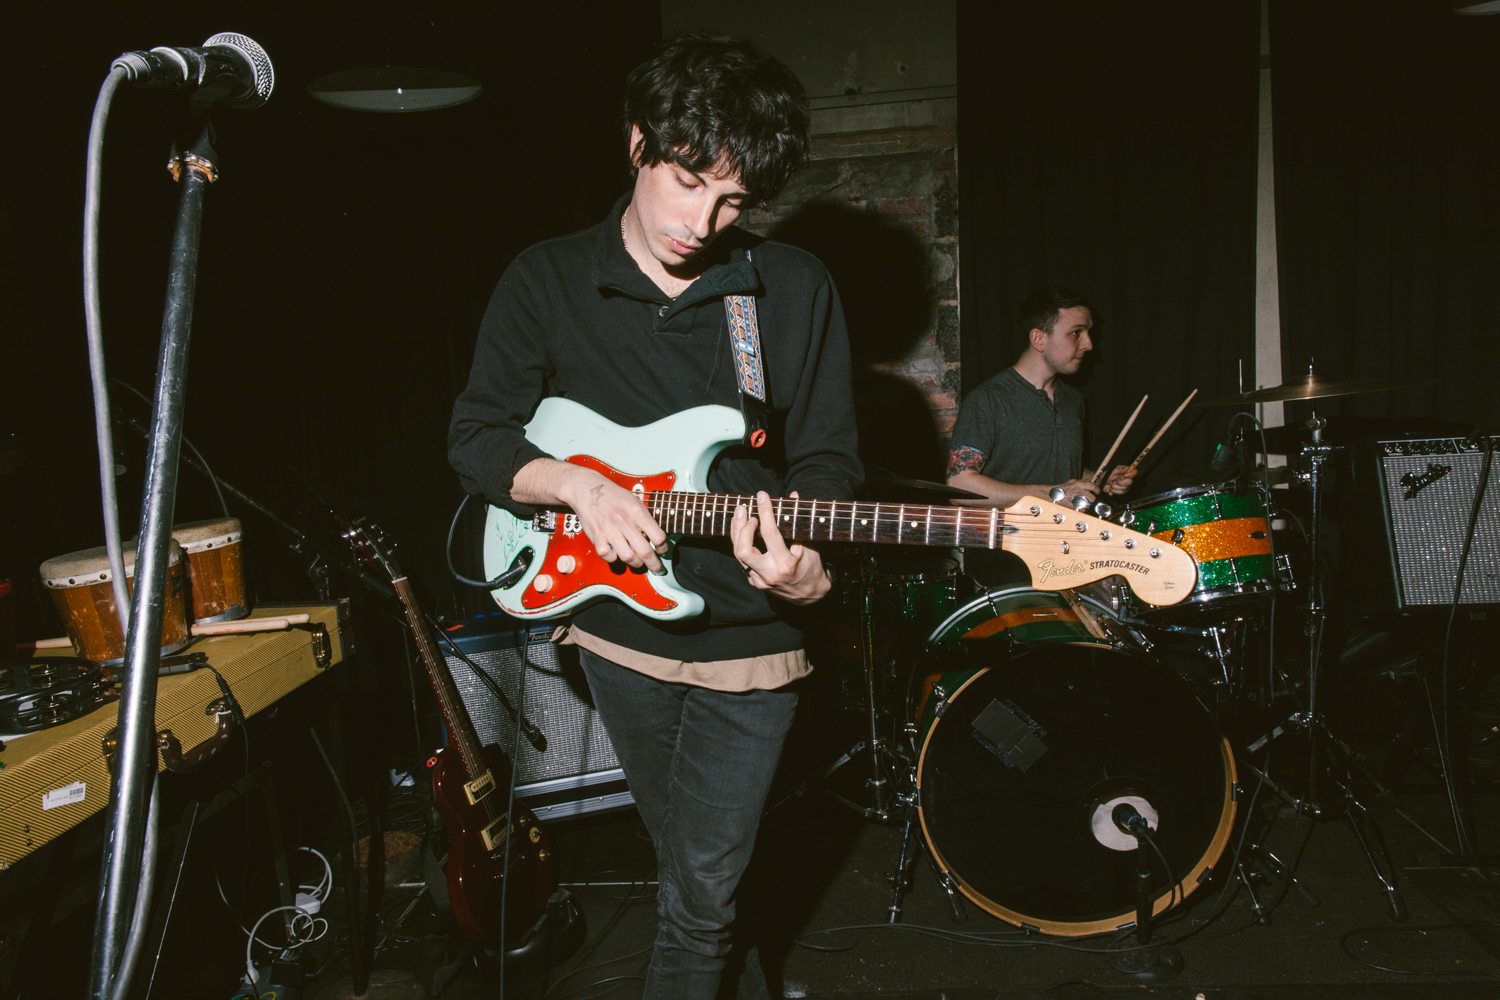 Craft Spells at Comet Ping Pong